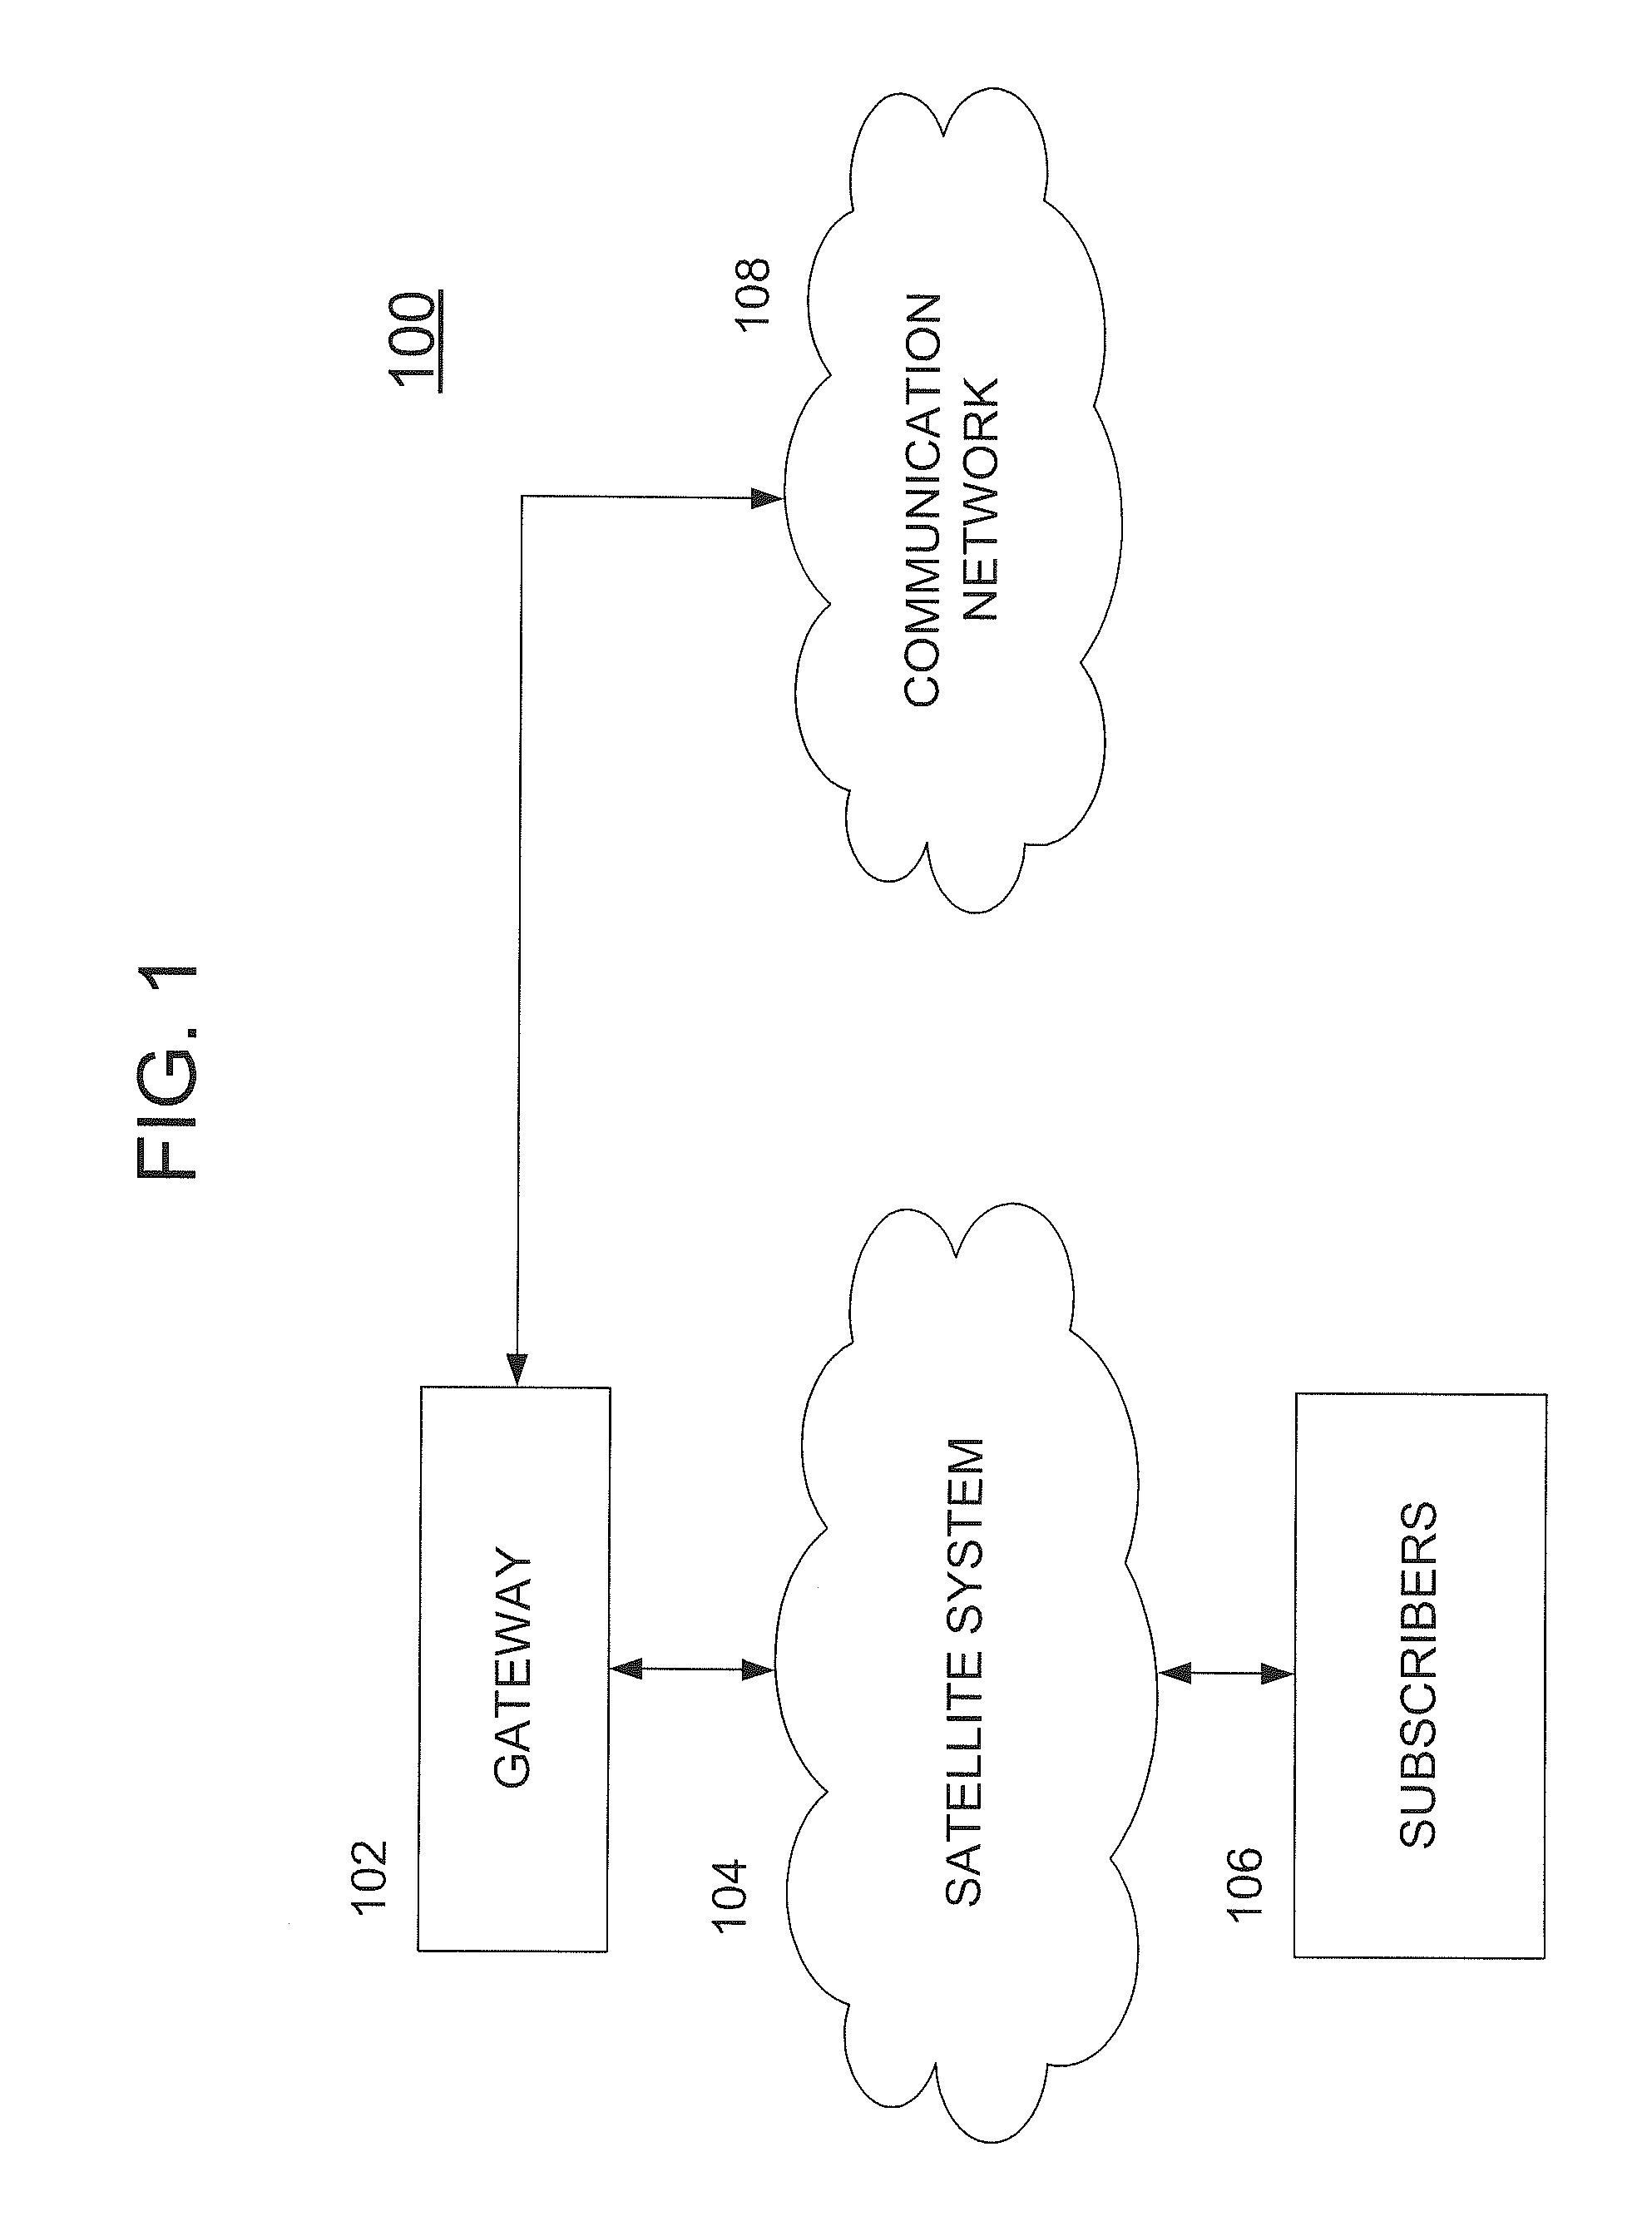 System and method for satellite communication